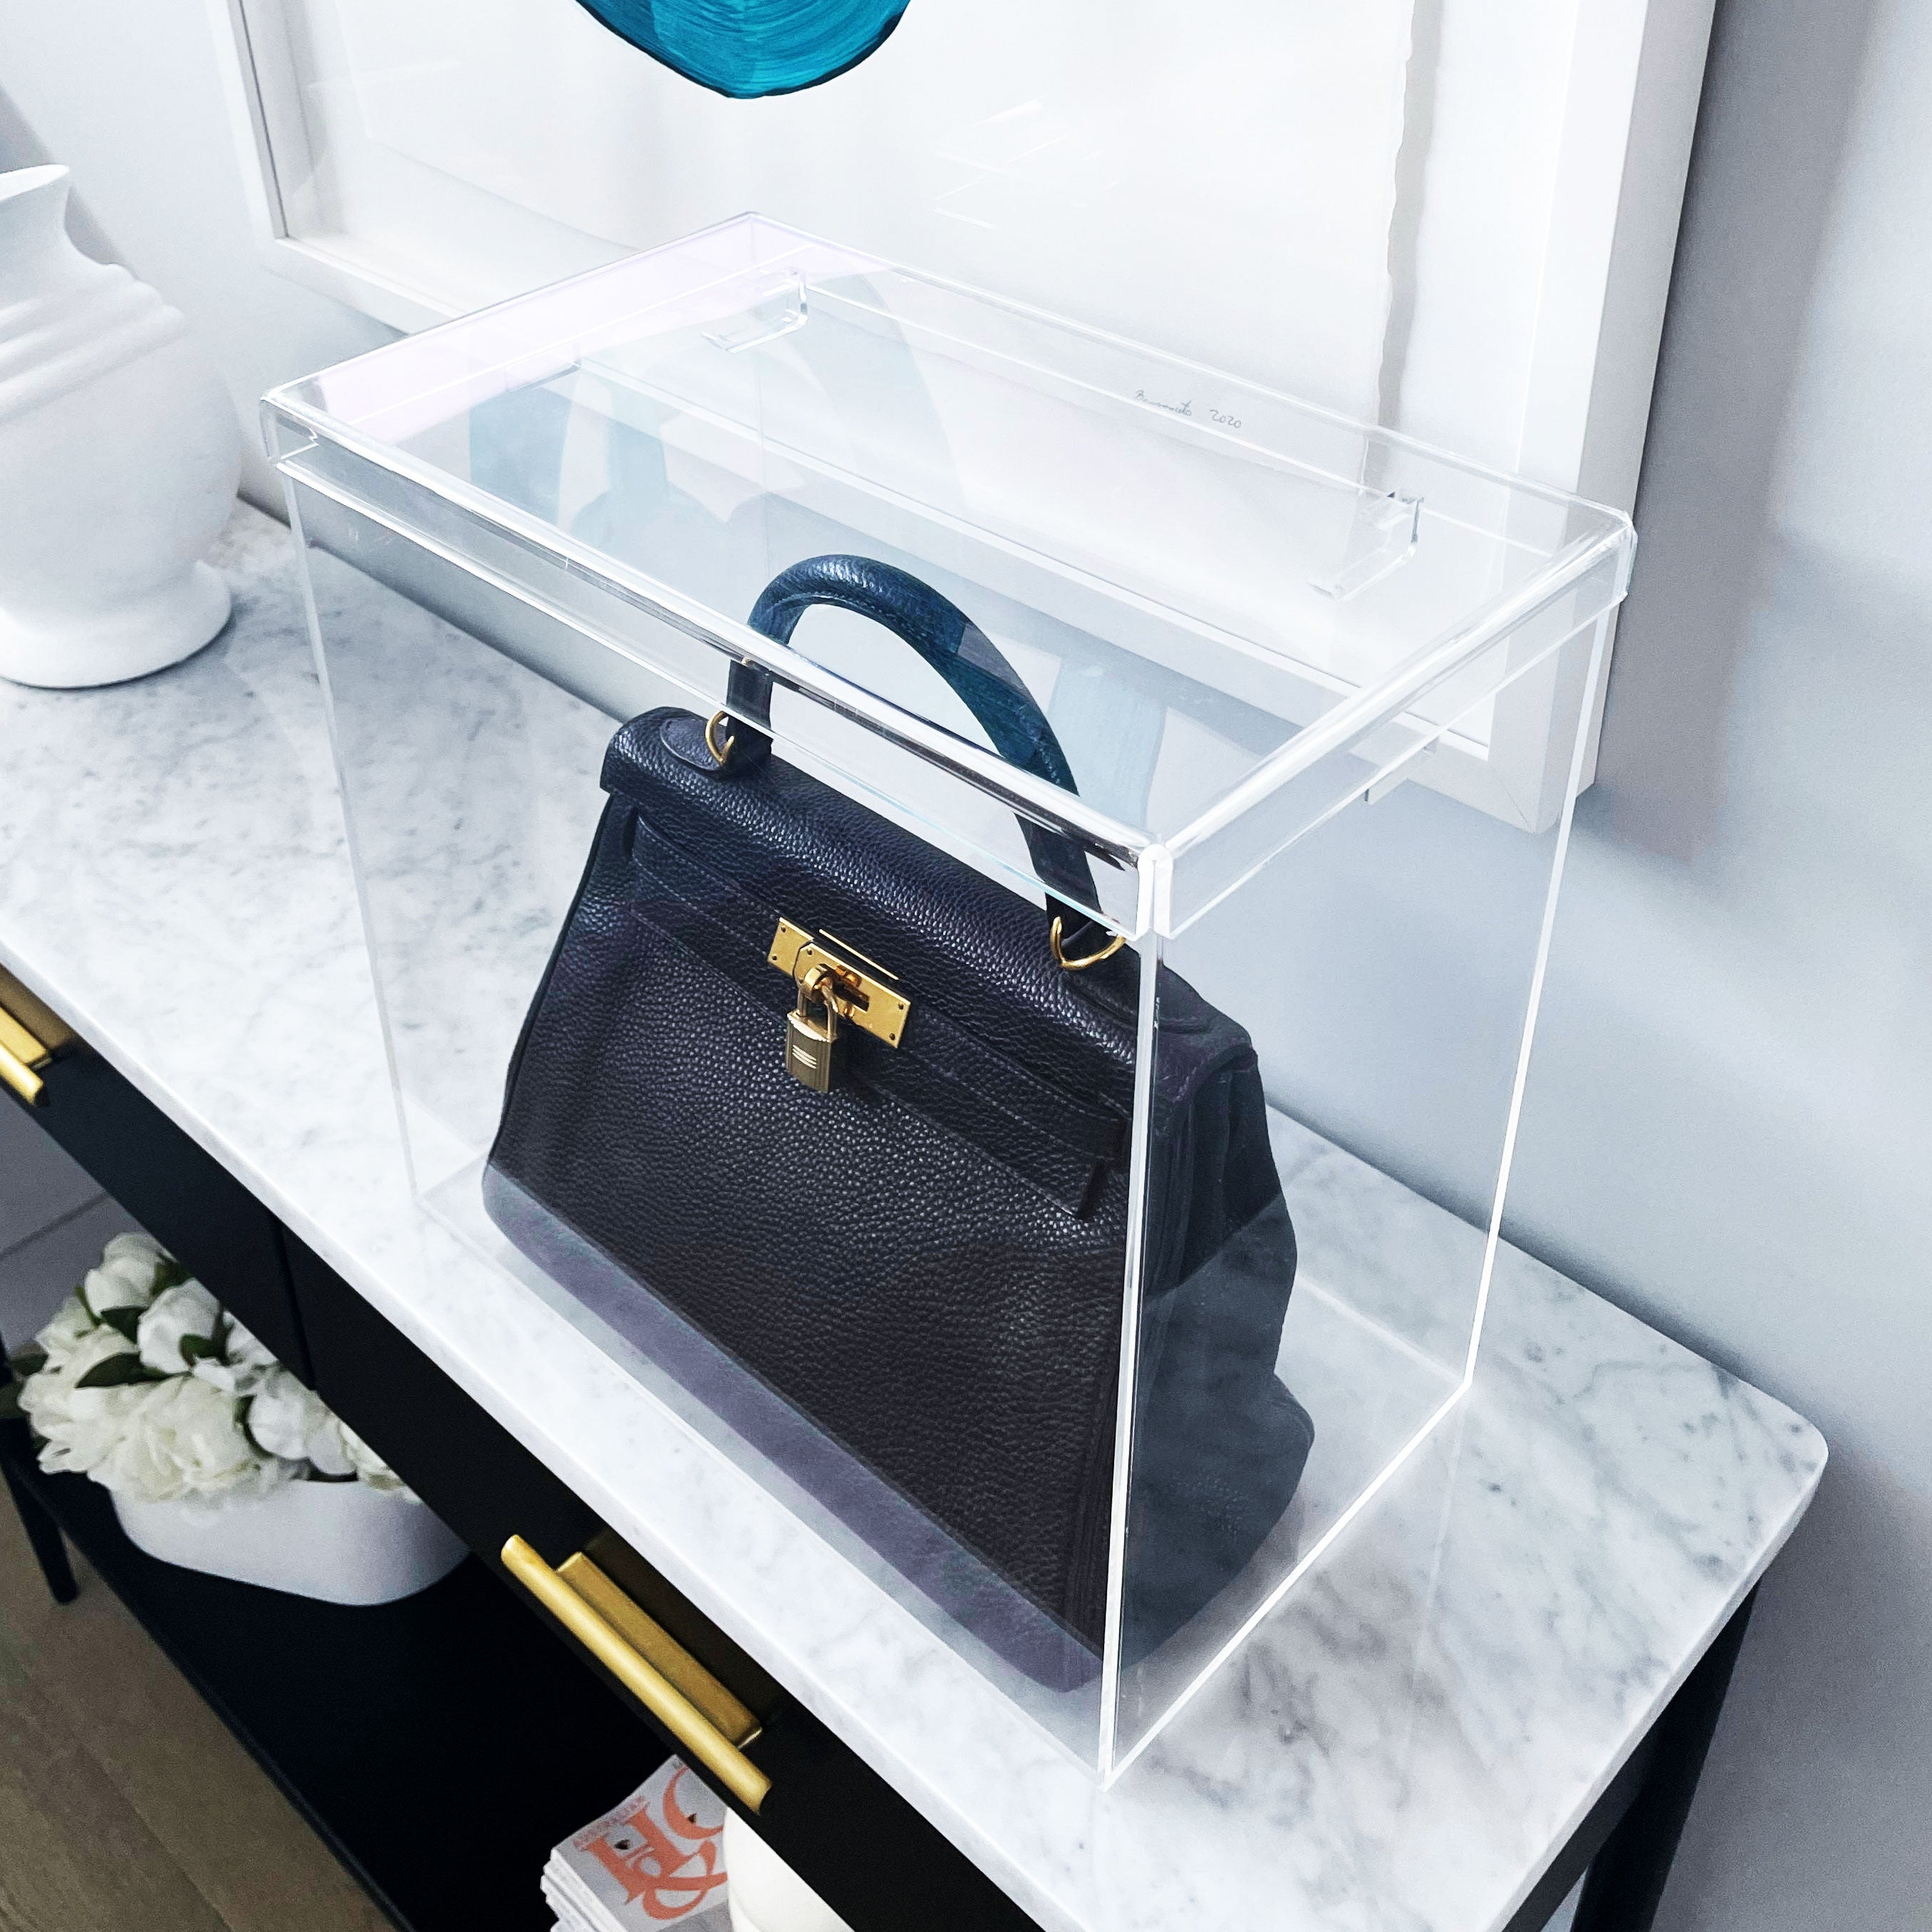 Bag Storage Ideas Product Review - Luxury Bag Display